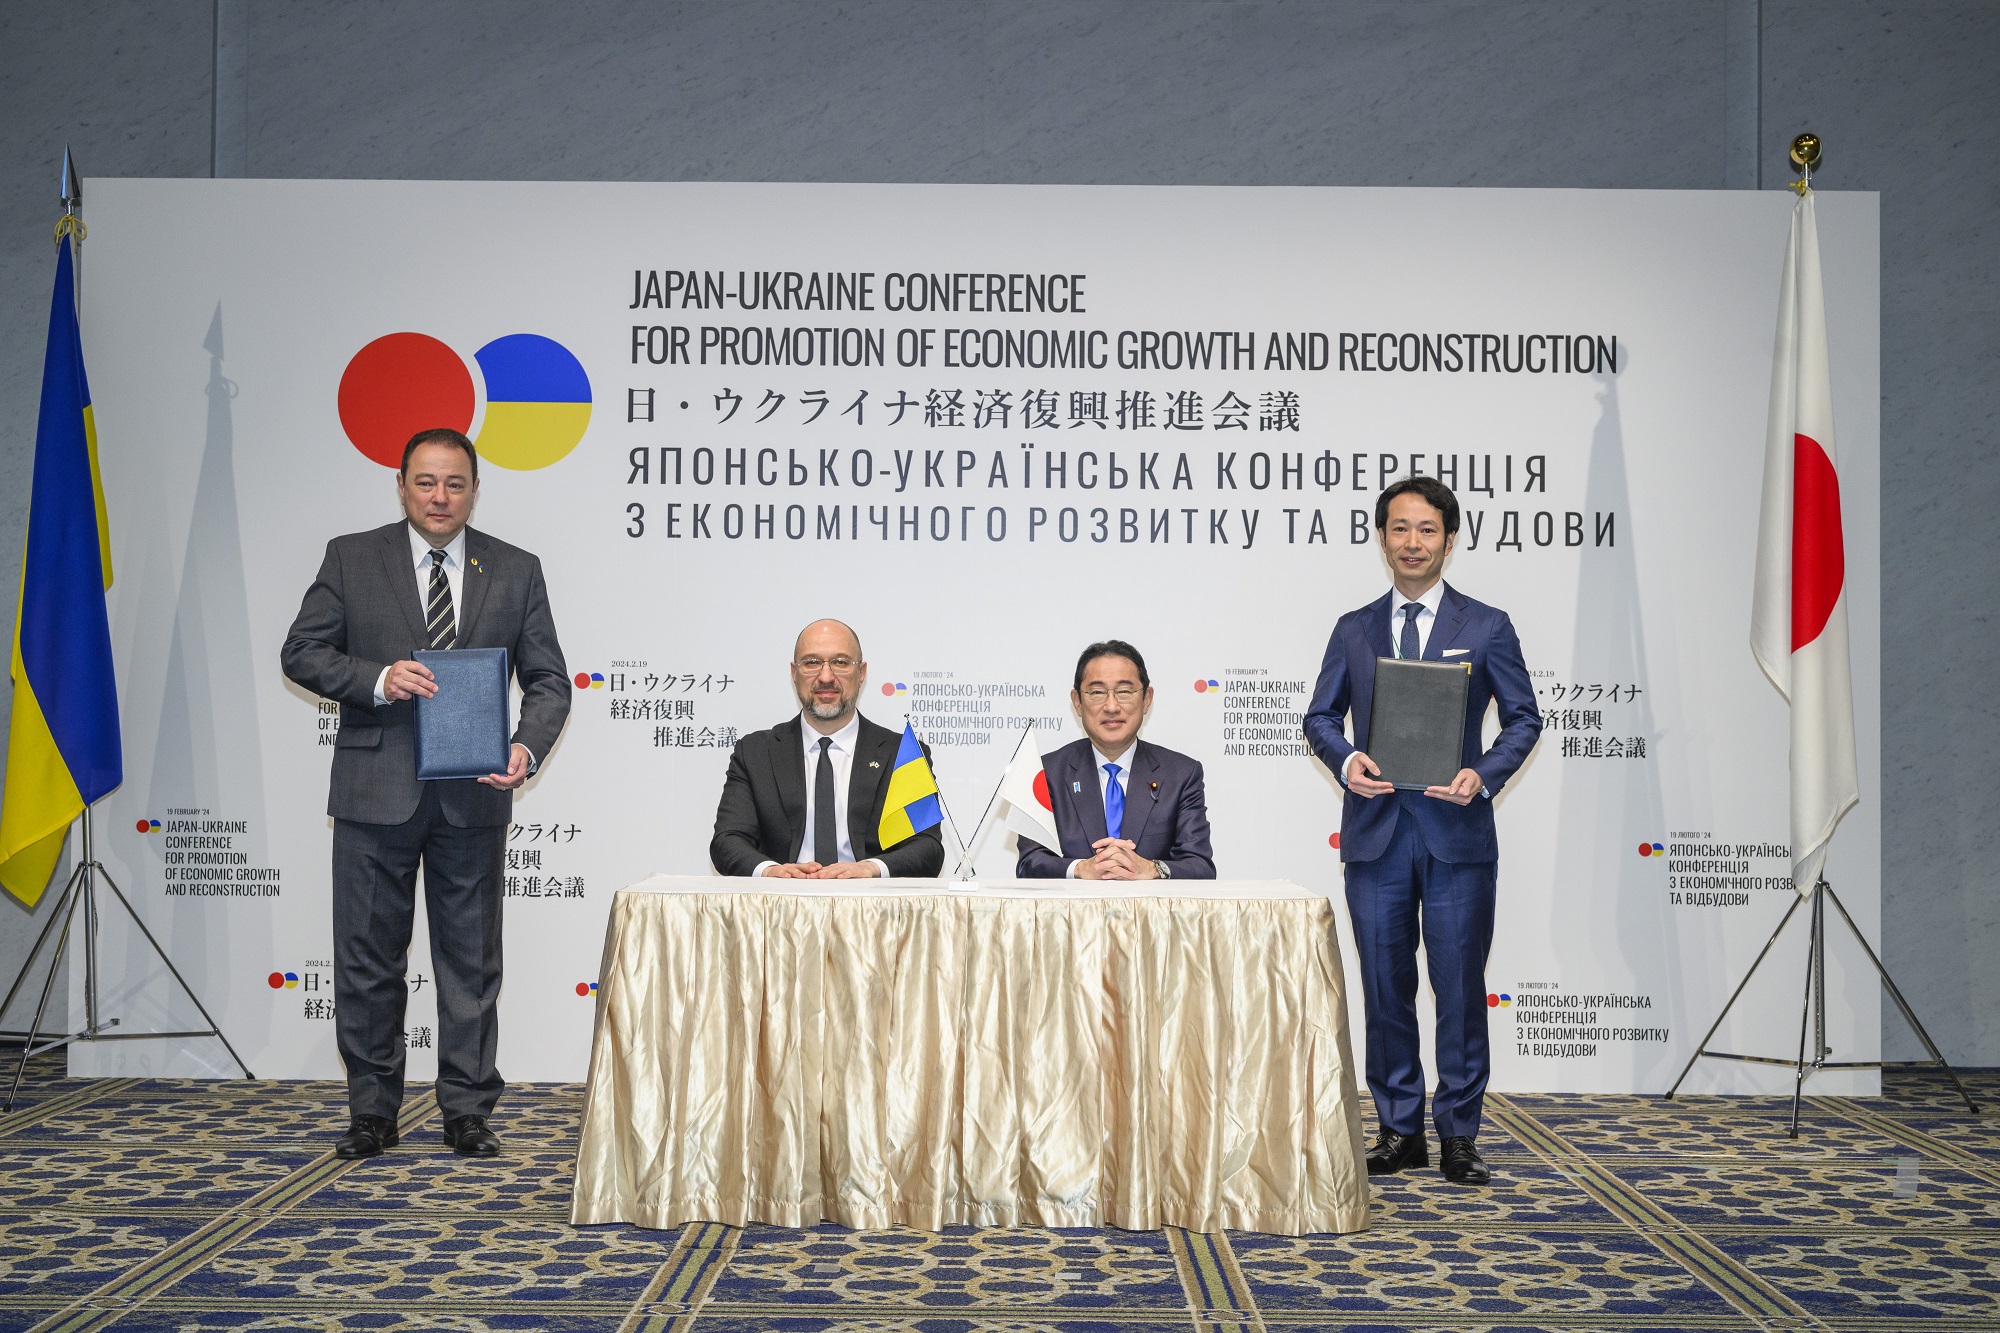 Rakuten Symphony and Kyivstar signed a protocol of intentions to develop Open RAN for the reconstruction of Ukraine